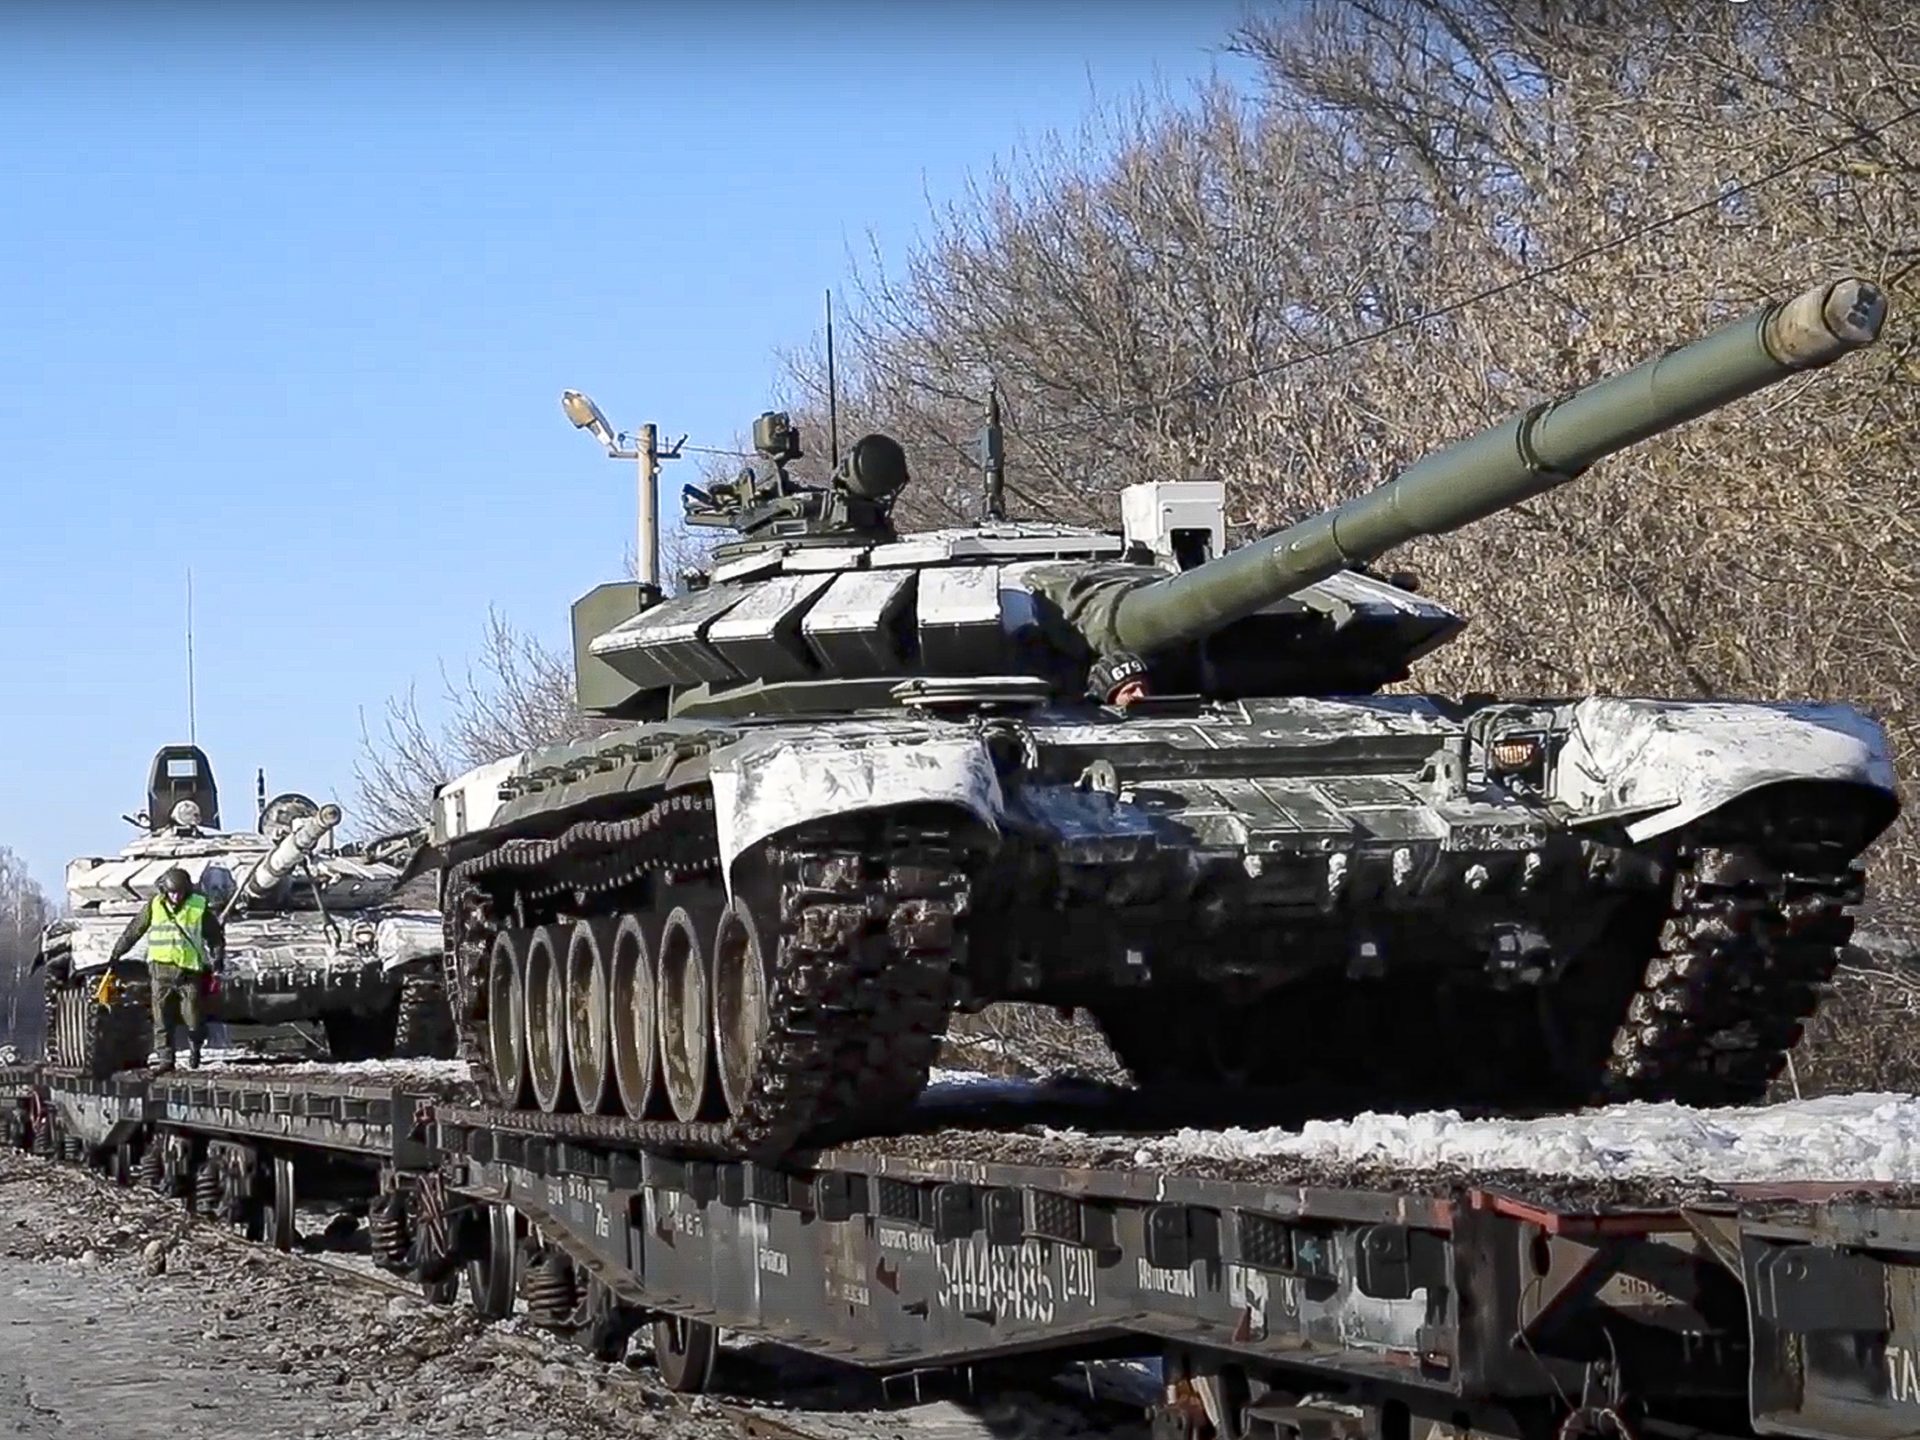 In mid-February, ahead of the invasion, Russian army tanks were loaded onto railway platforms to move back to their permanent base after drills in Russia.